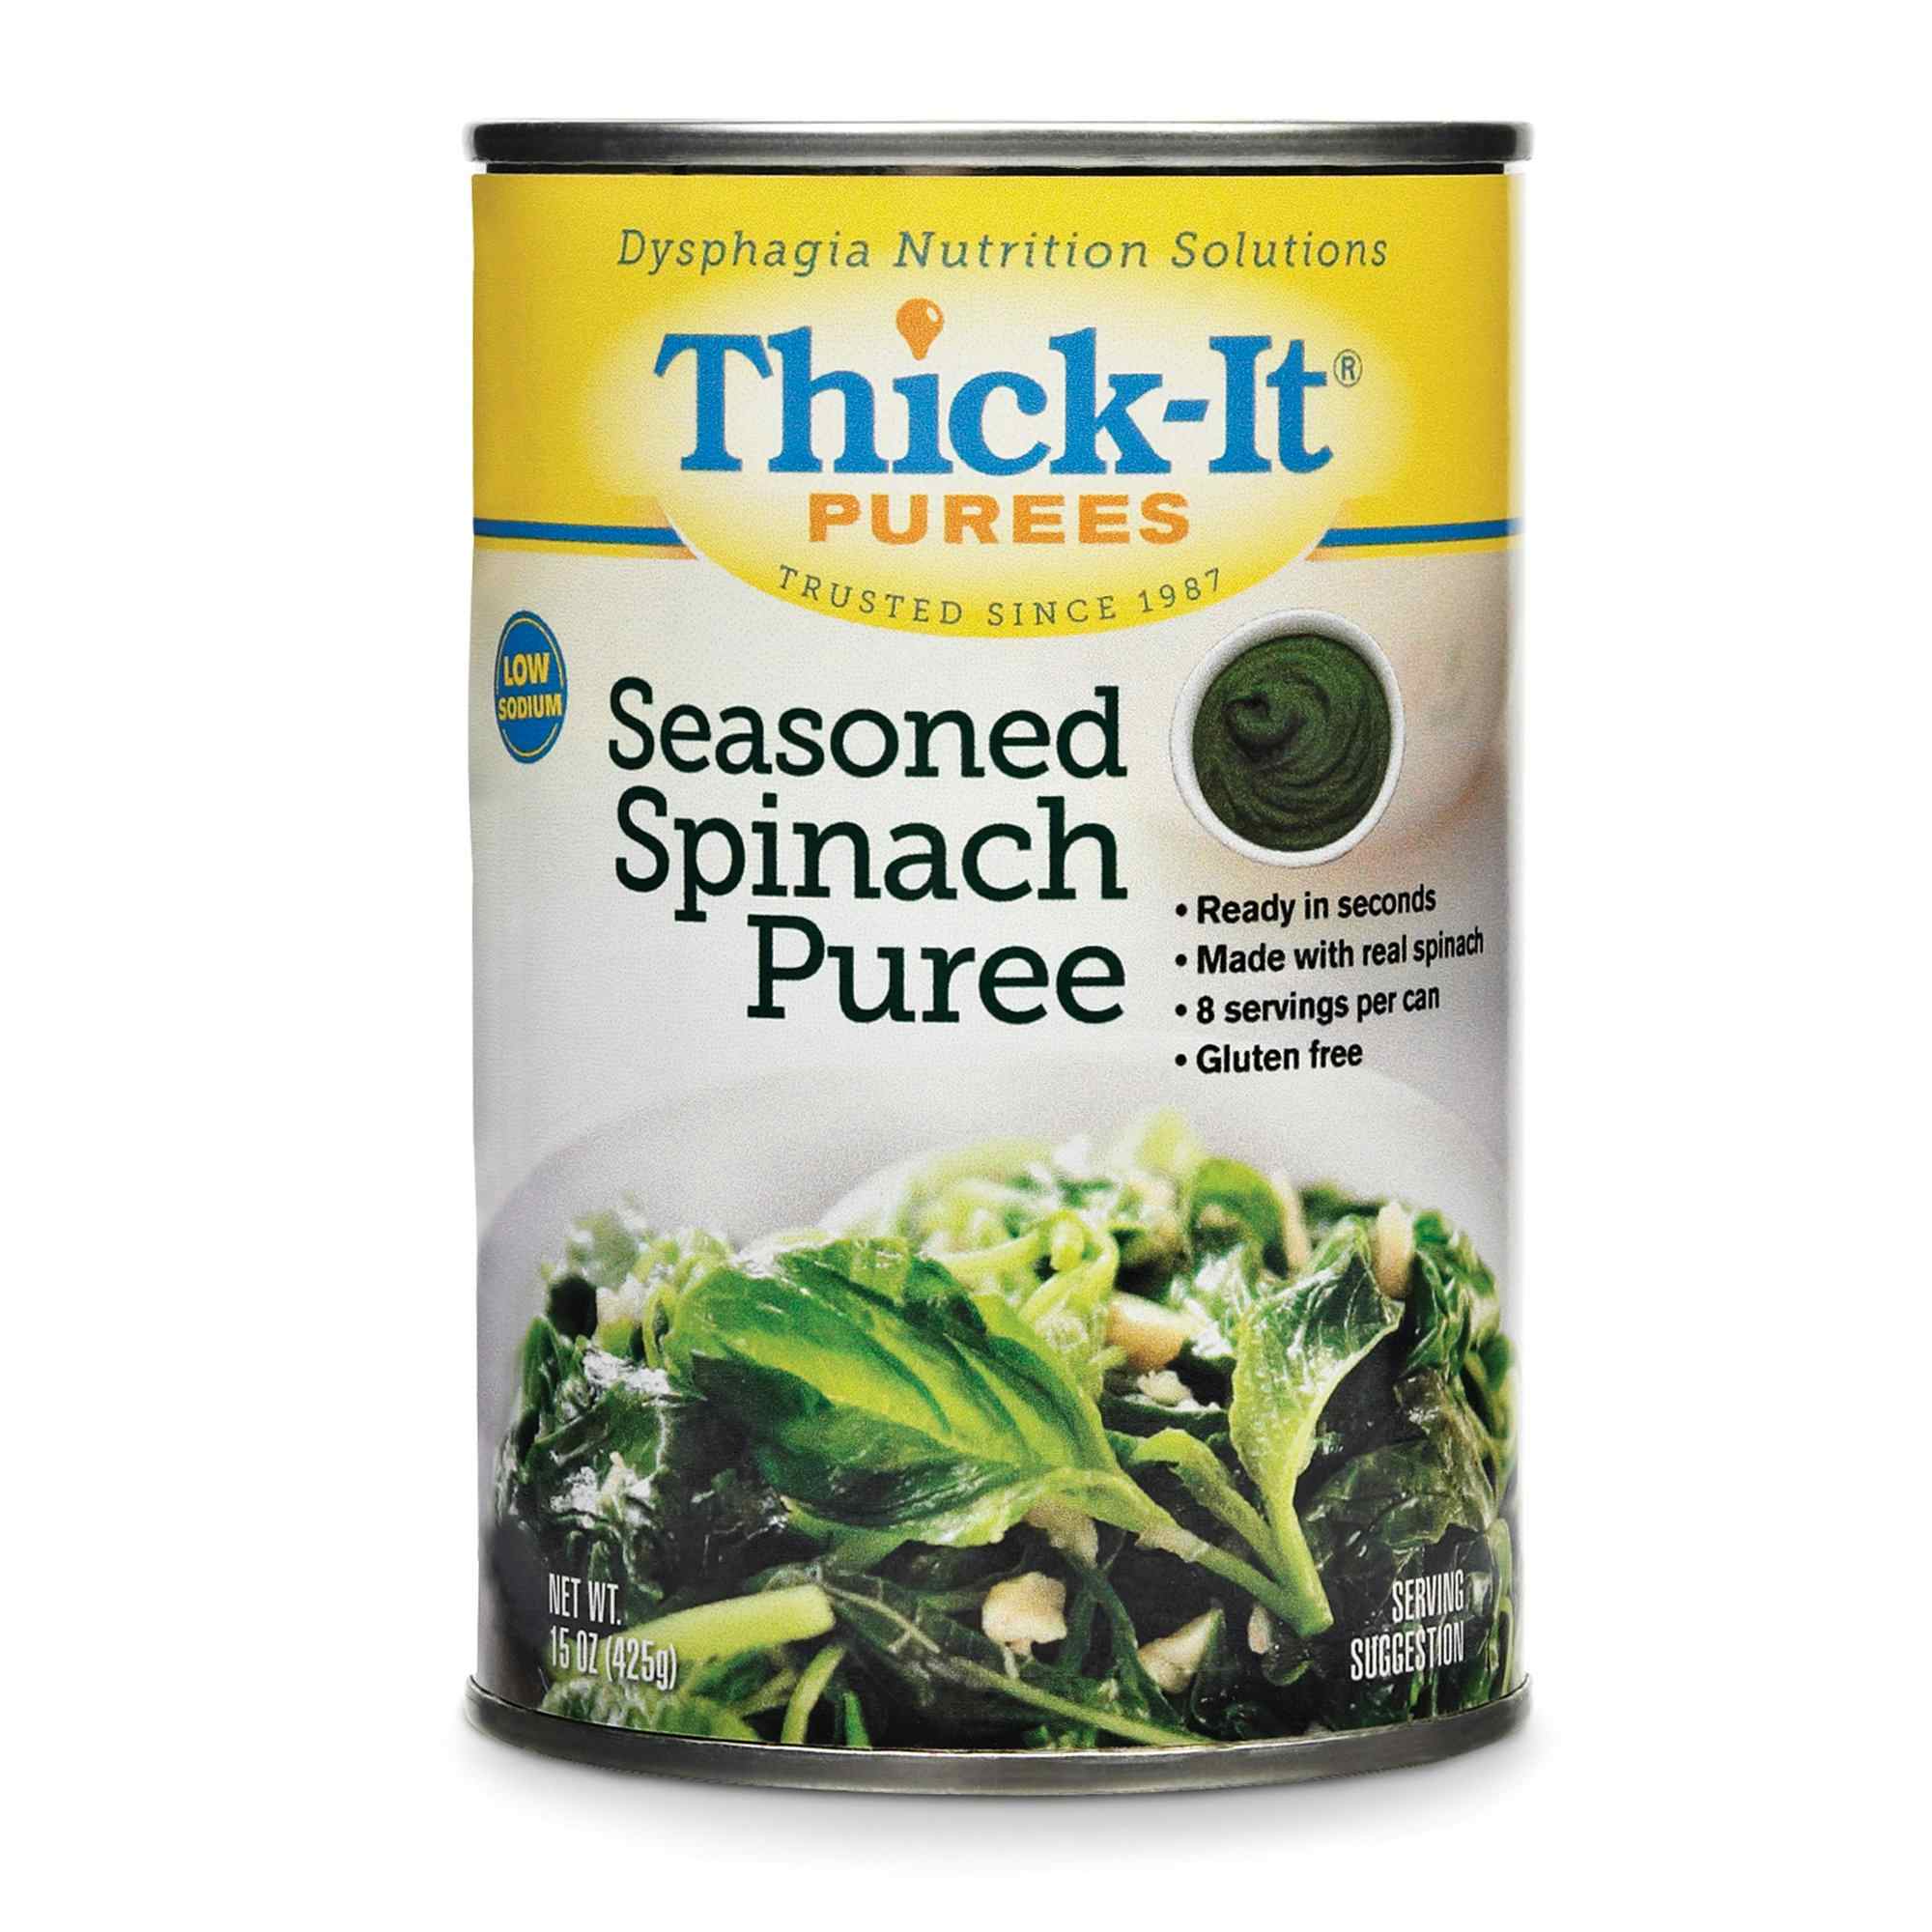 Thick-It Purees Seasoned Spinach Puree, 15 oz., H320-F8800, 1 Each